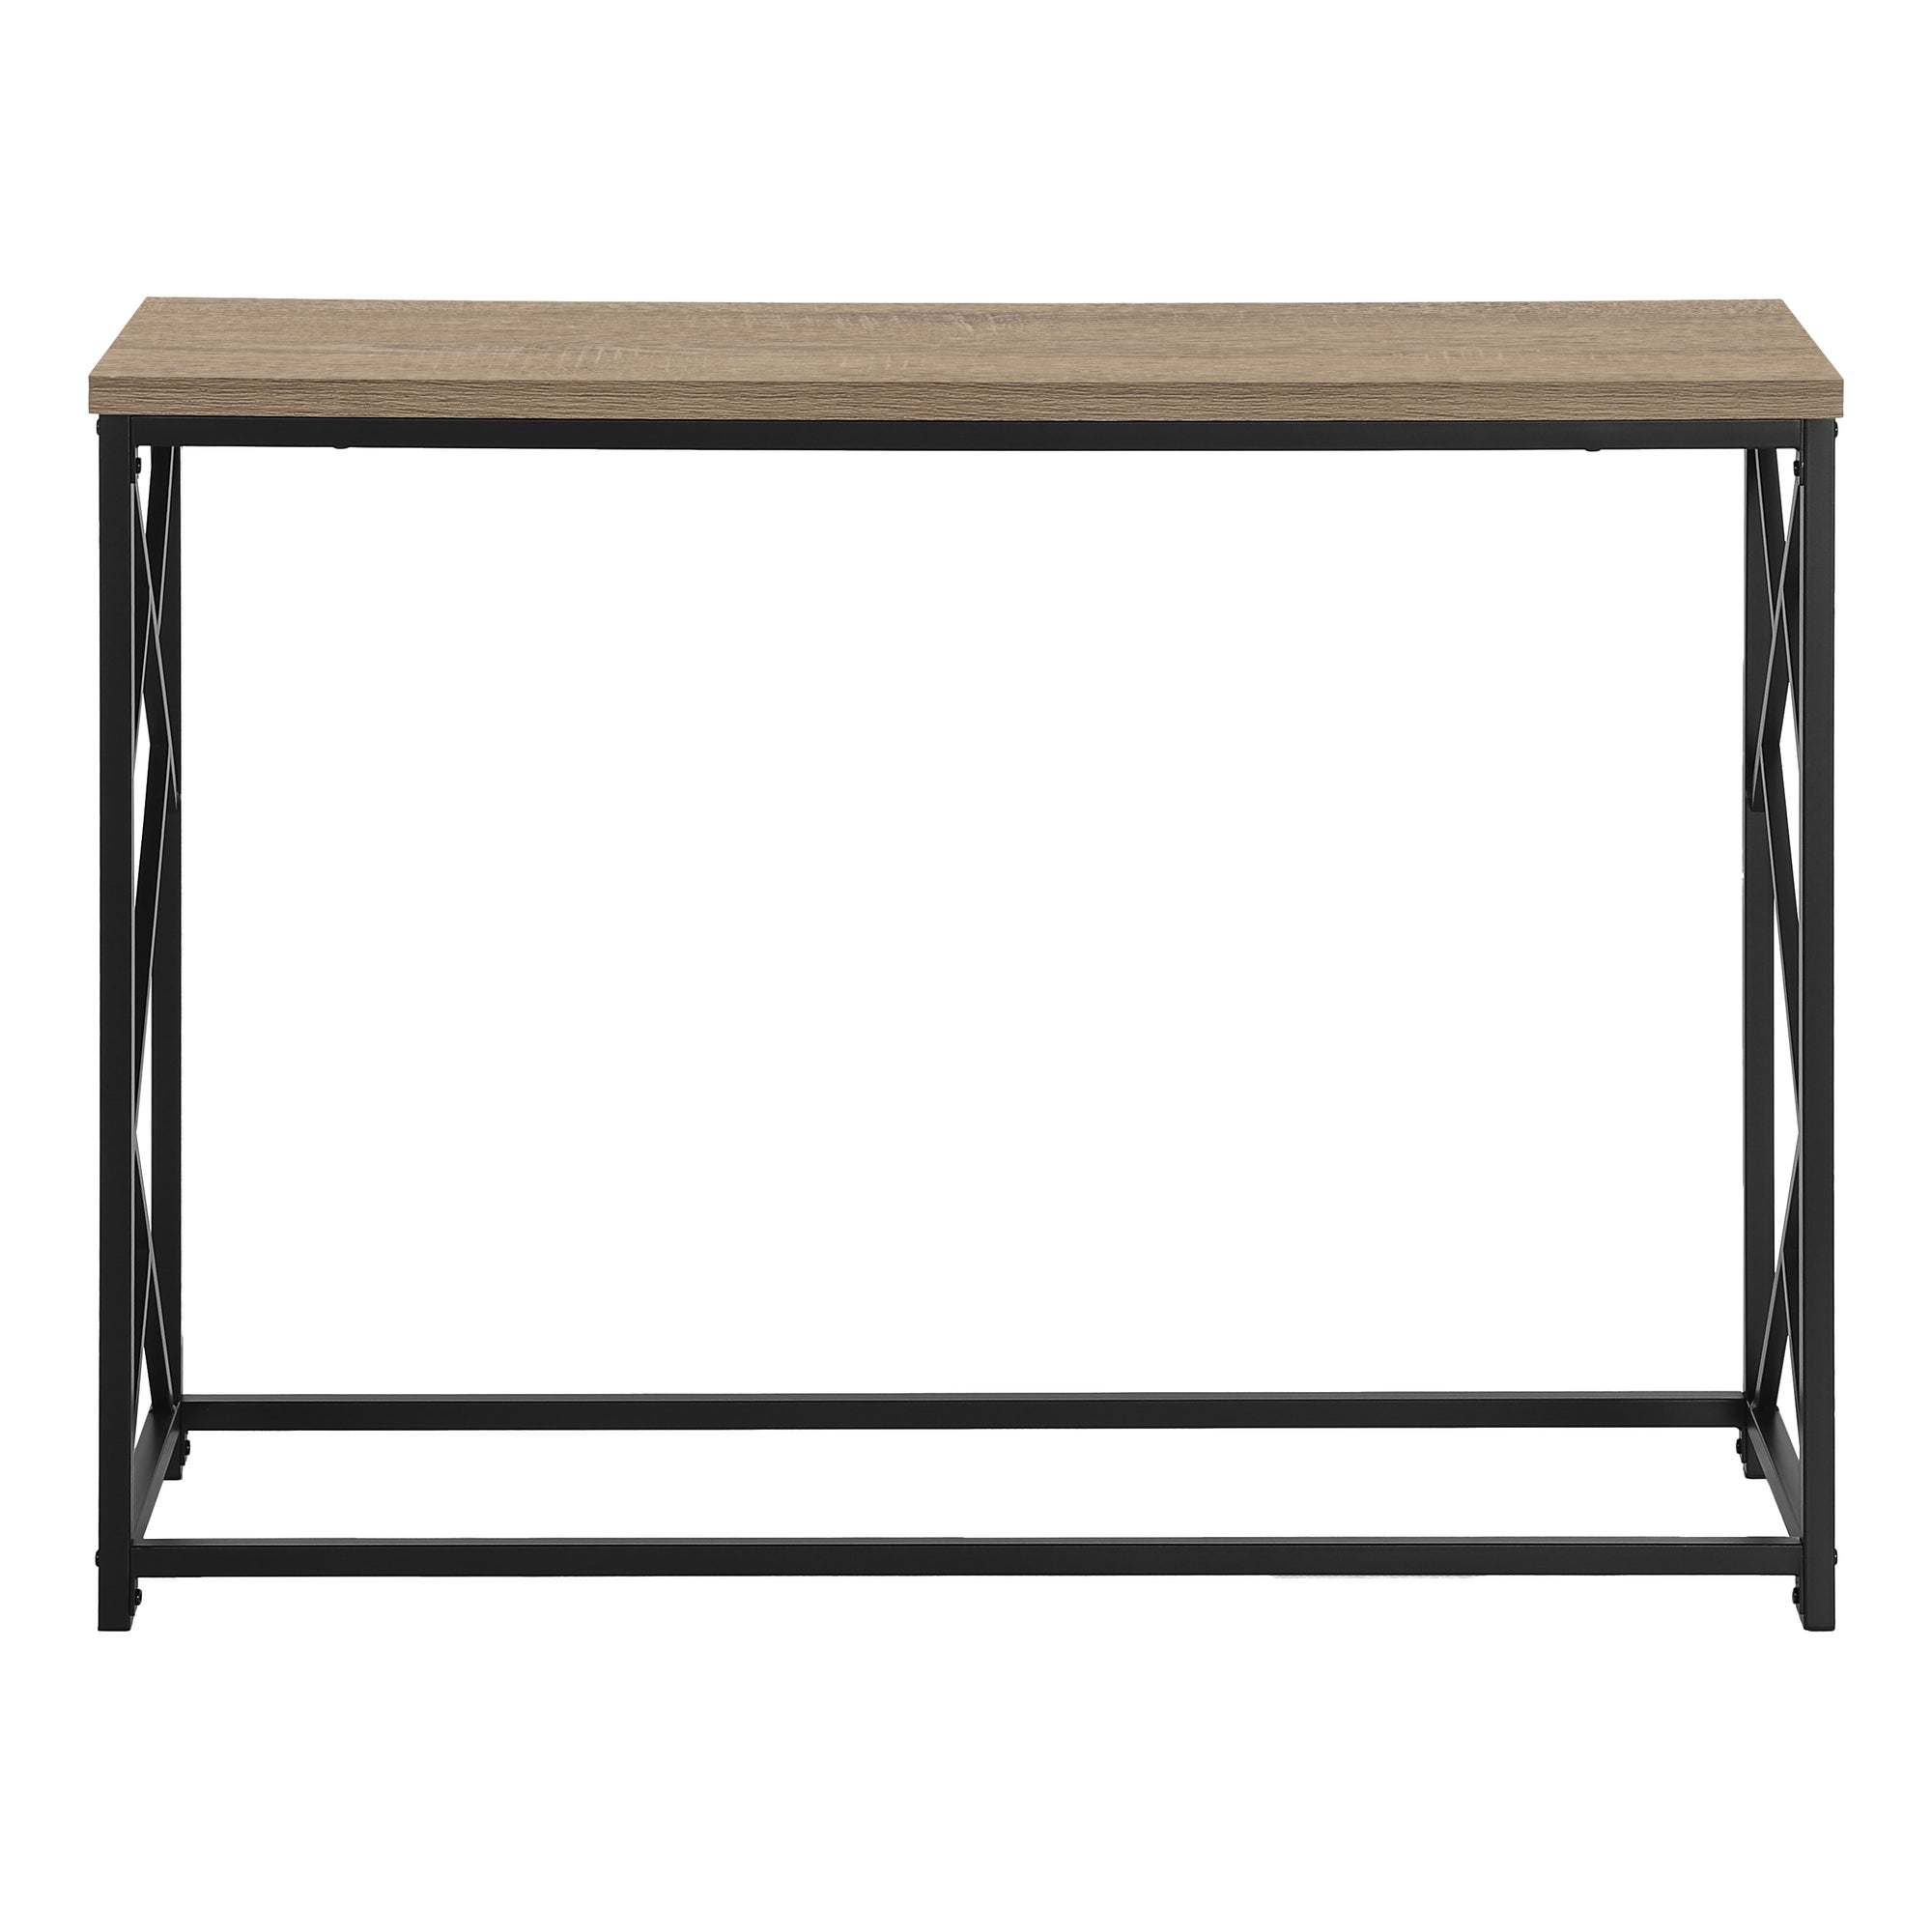 MN-243533    Accent Table, Console, Entryway, Narrow, Sofa, Living Room, Bedroom, Metal Frame, Laminate, Dark Taupe, Black, Contemporary, Modern